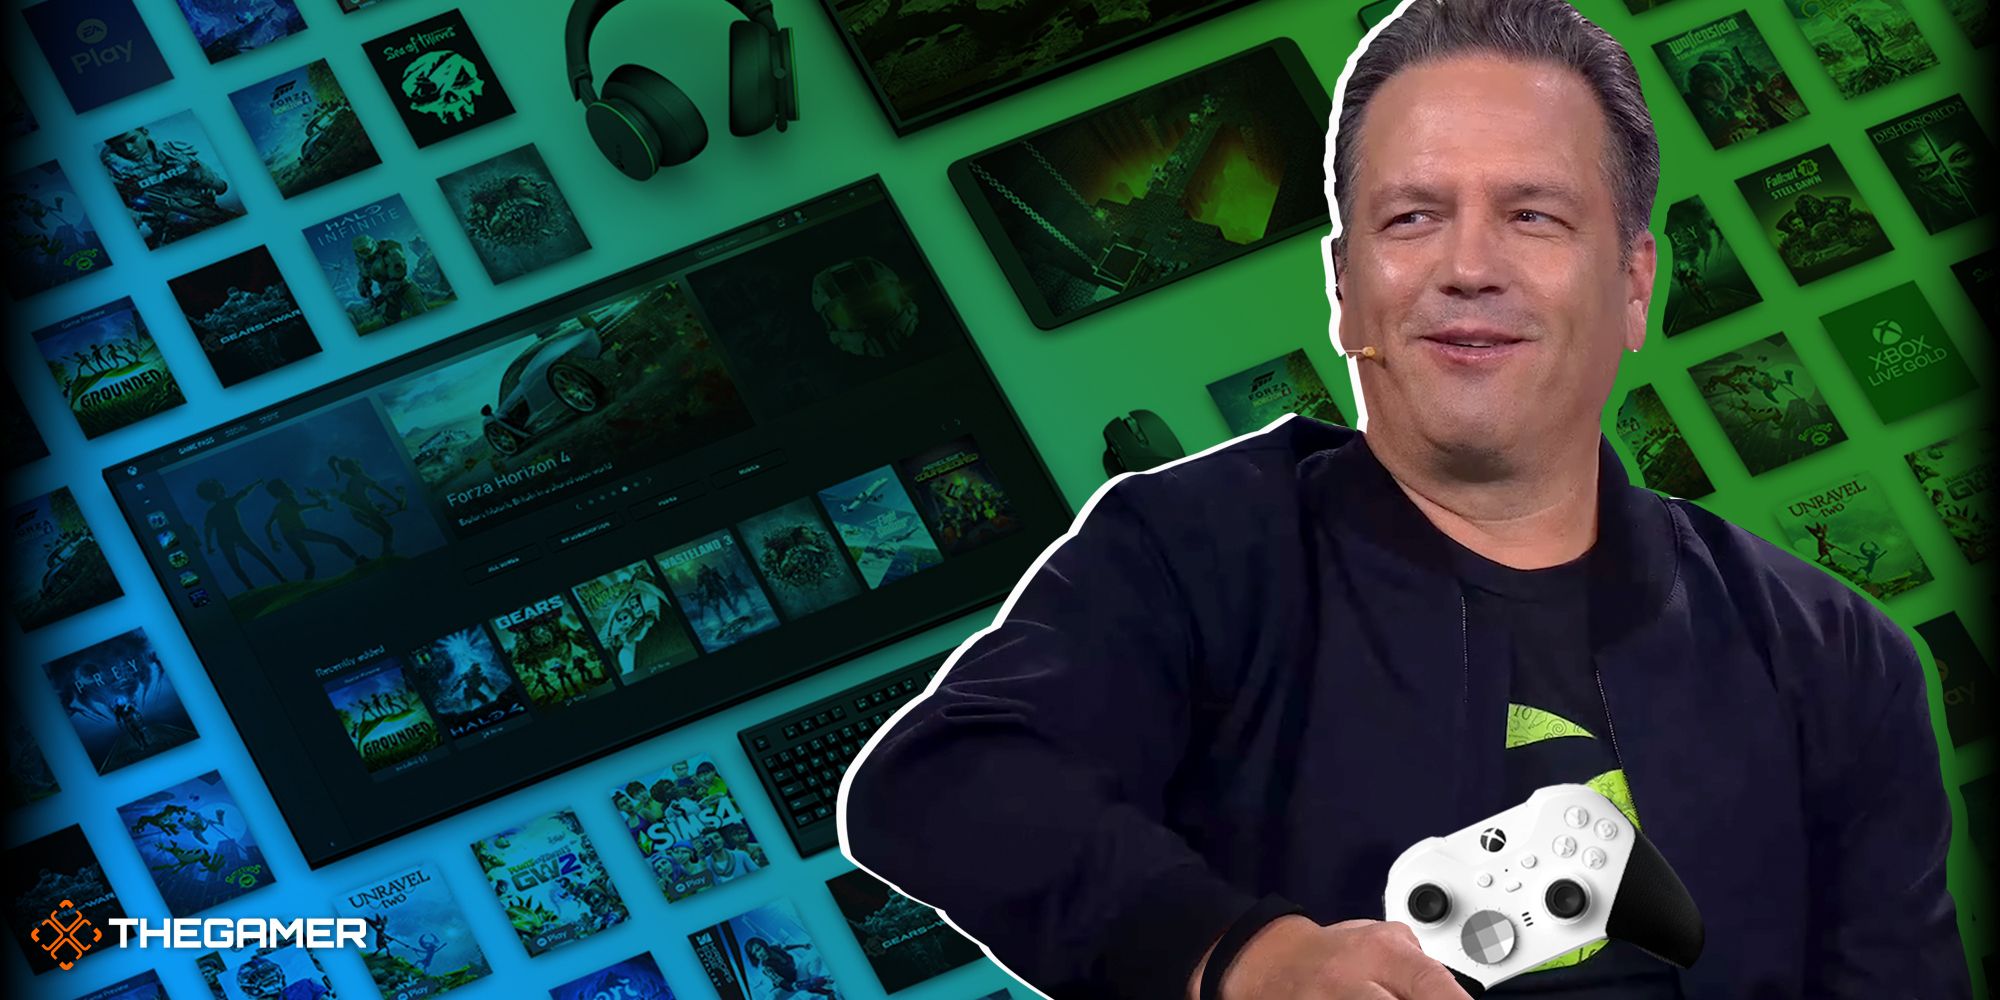 Phil Spencer holding an Xbox controller with a background of the games available on Xbox